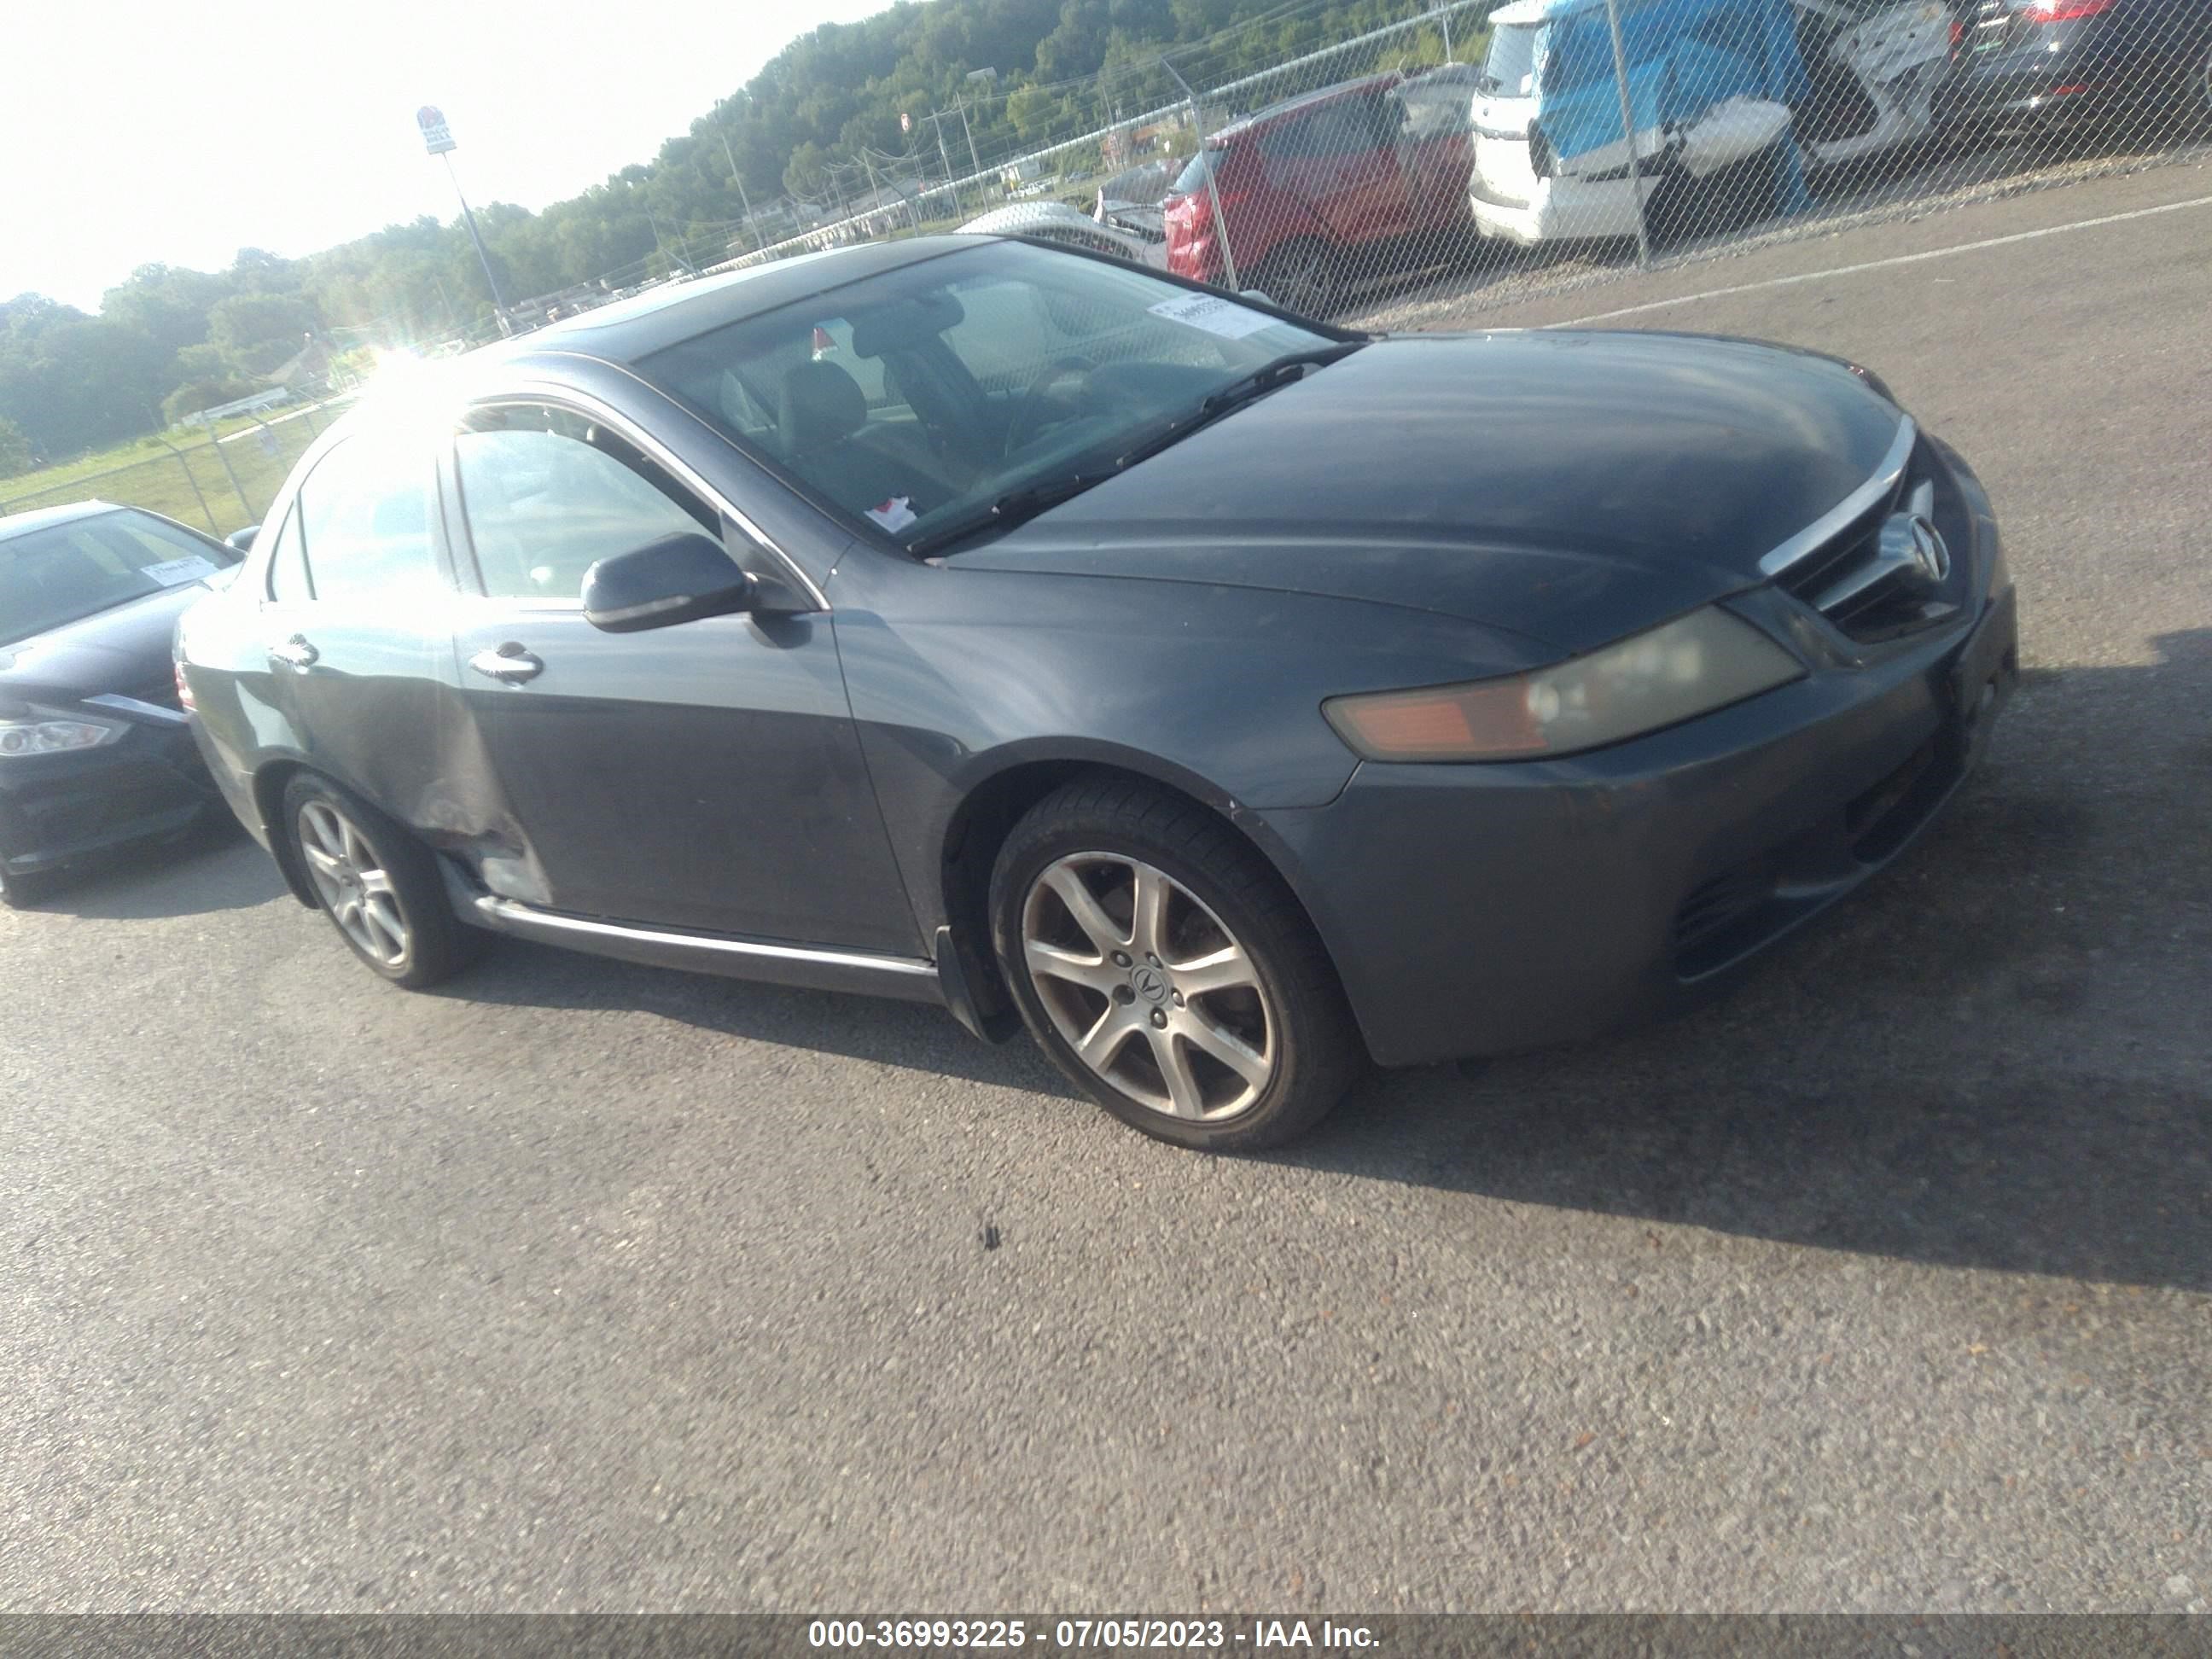 acura tsx 2004 jh4cl96864c045789